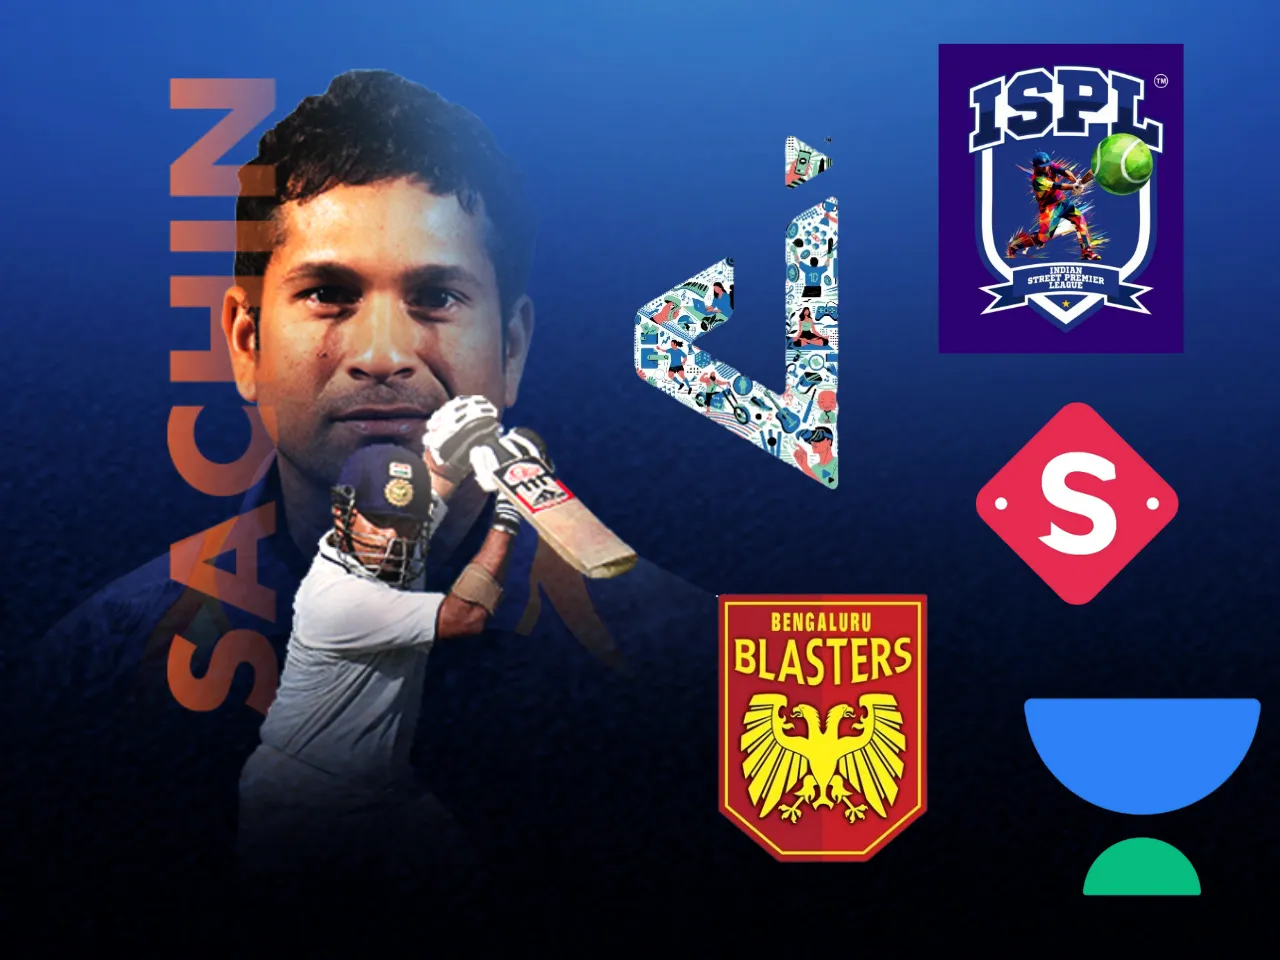 Post match innings: Sachin Tendulkar's investments in businesses and sporting leagues!